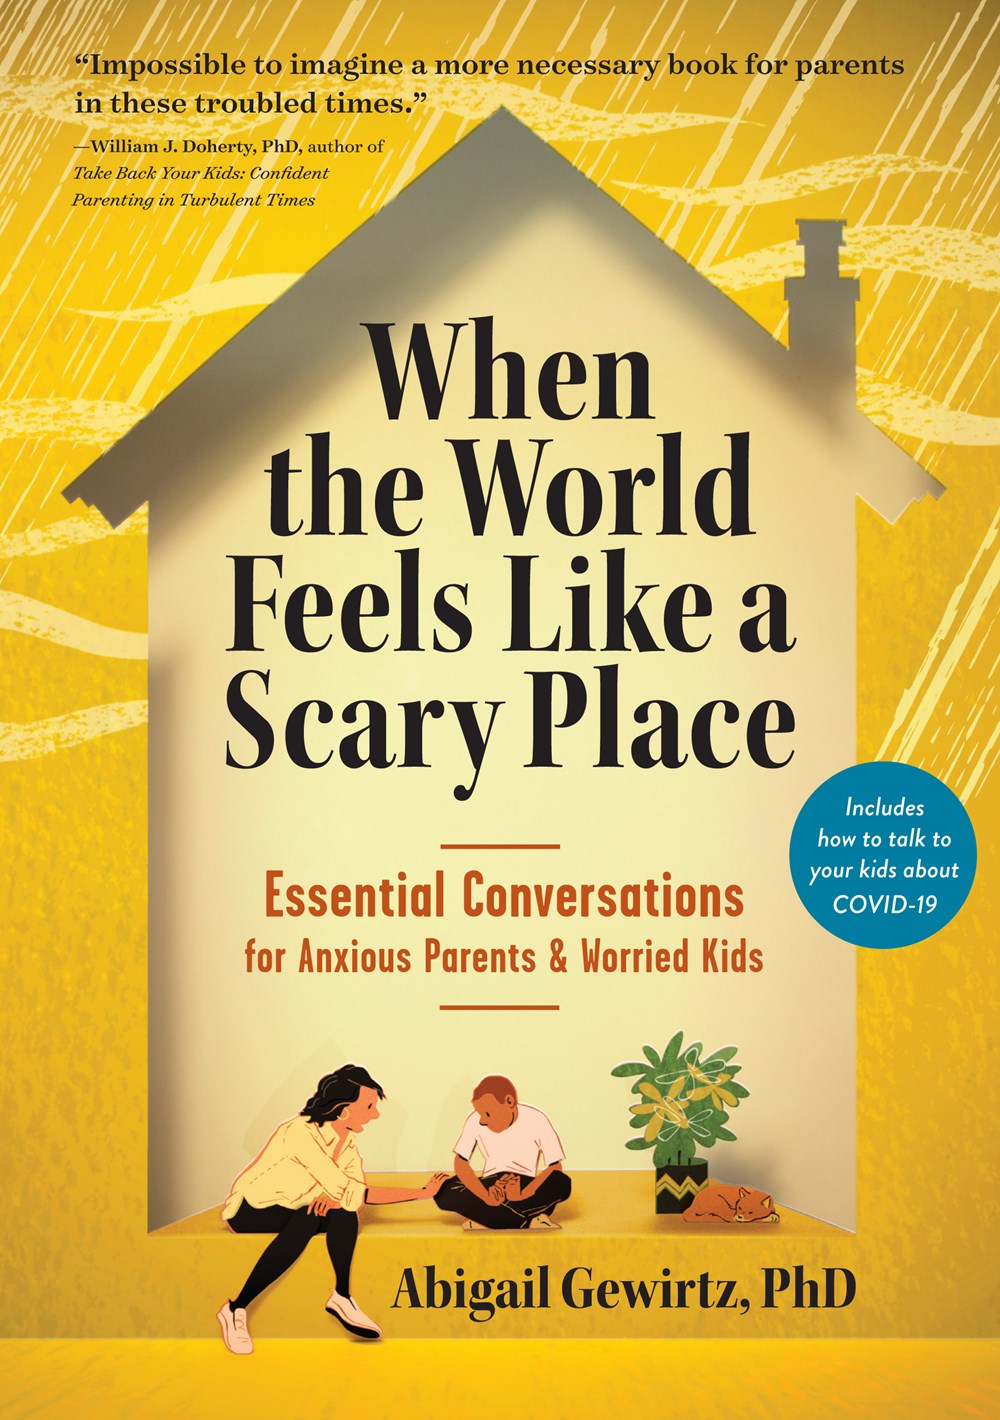 Parenting Best Sellers, Feb. 2021 | Most In-Demand in Libraries & Bookstores